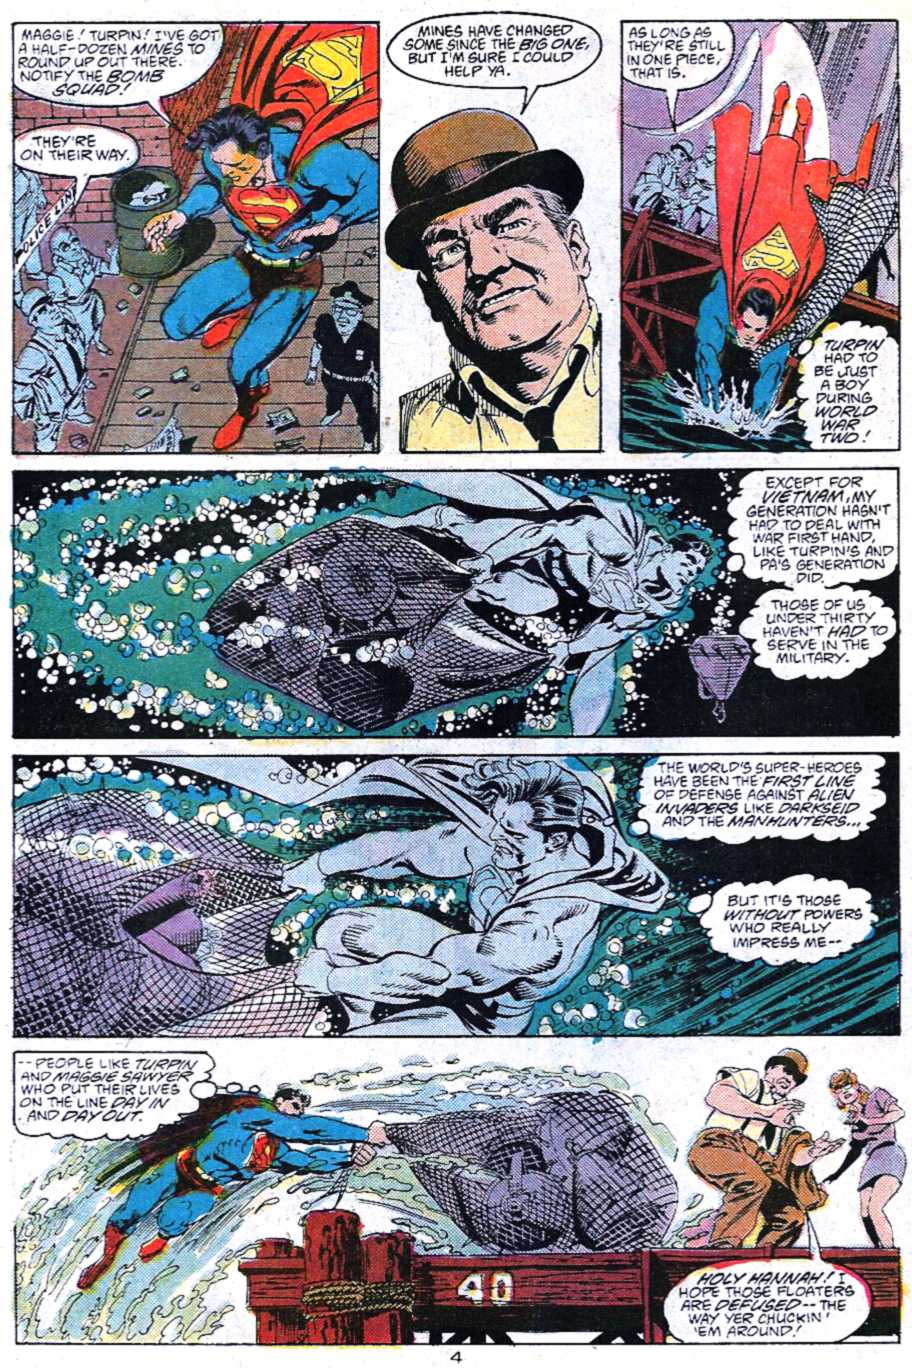 Adventures of Superman (1987) 447 Page 3